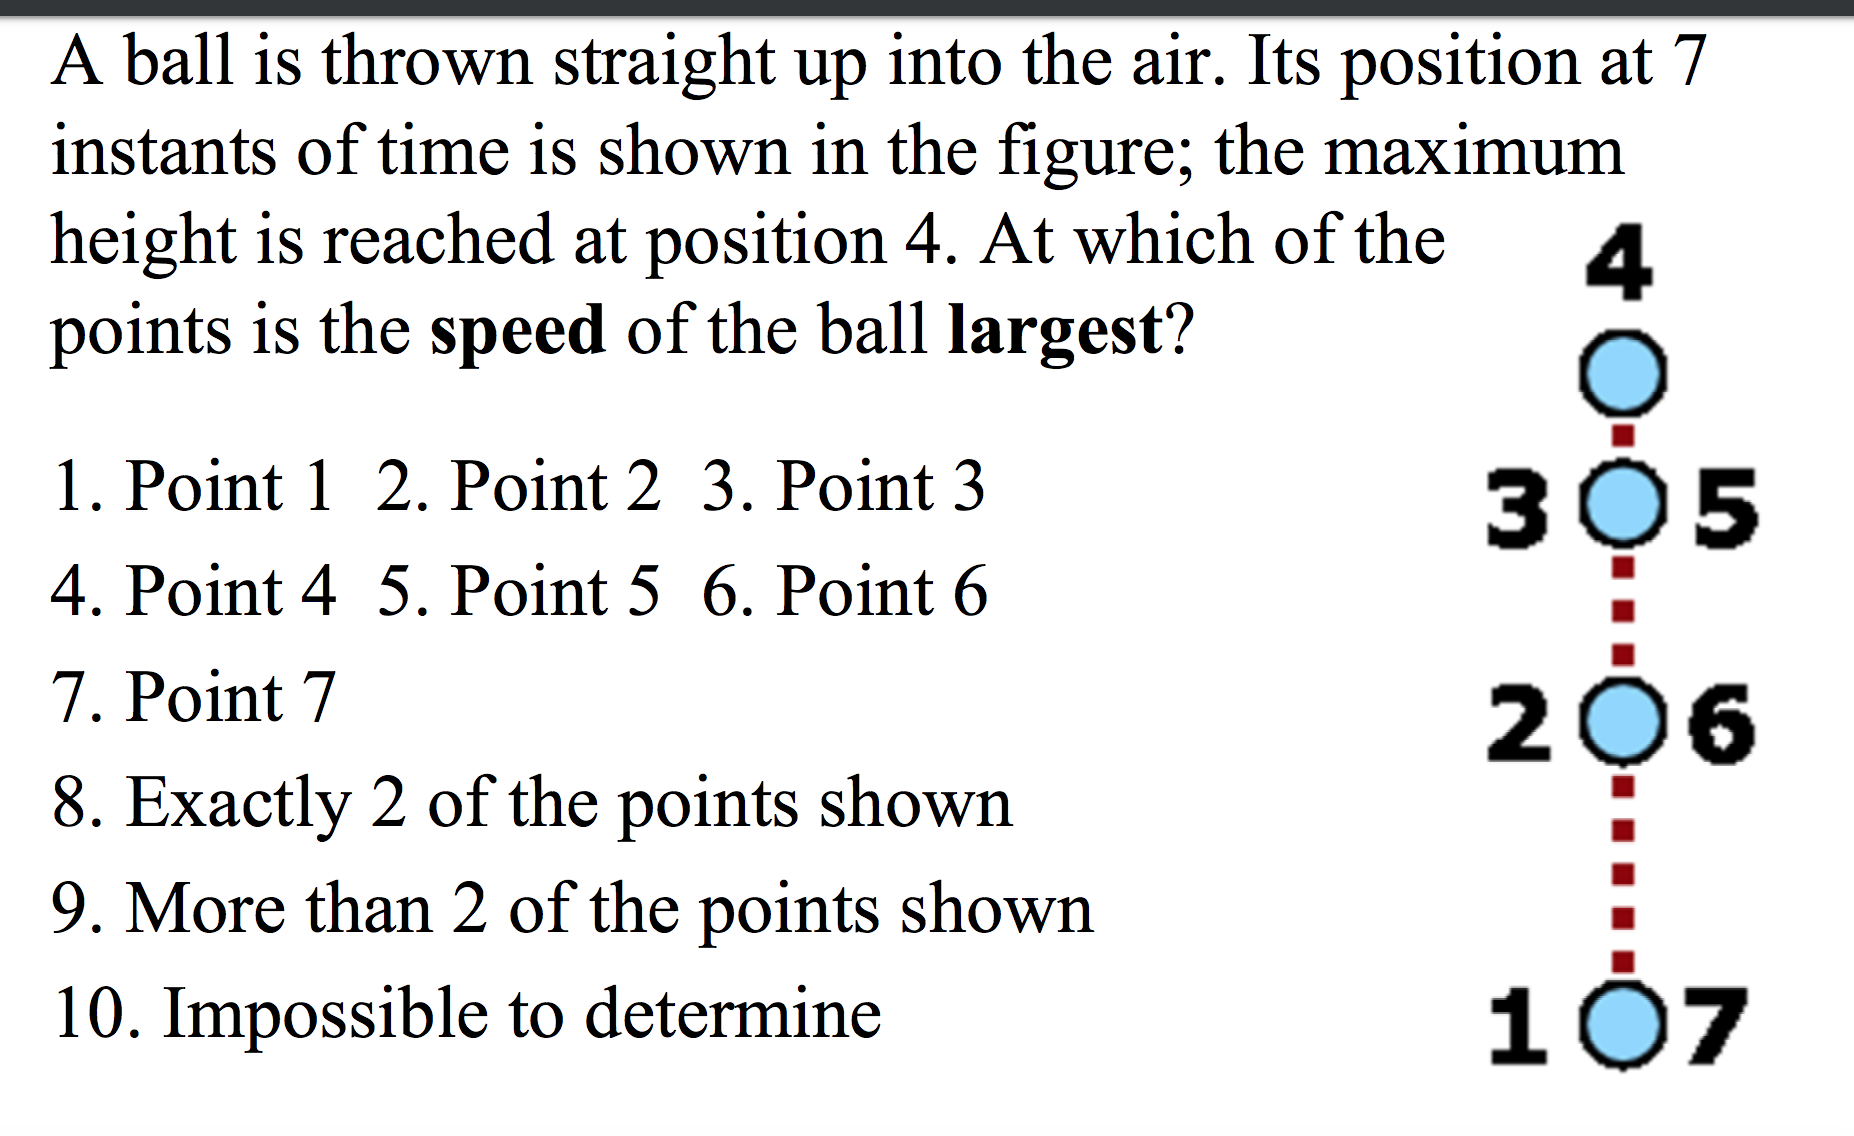 A ball is thrown straight up into the air. Its position at 7
instants of time is shown in the figure; the maximum
height is reached at position 4. At which of the
points is the speed of the ball largest?
1. Point 1 2. Point 2 3. Point 3
3O5
4. Point 4 5. Point 5 6. Point 6
7. Point 7
206
8. Exactly 2 of the points shown
9. More than 2 of the points shown
107
10. Impossible to determine
